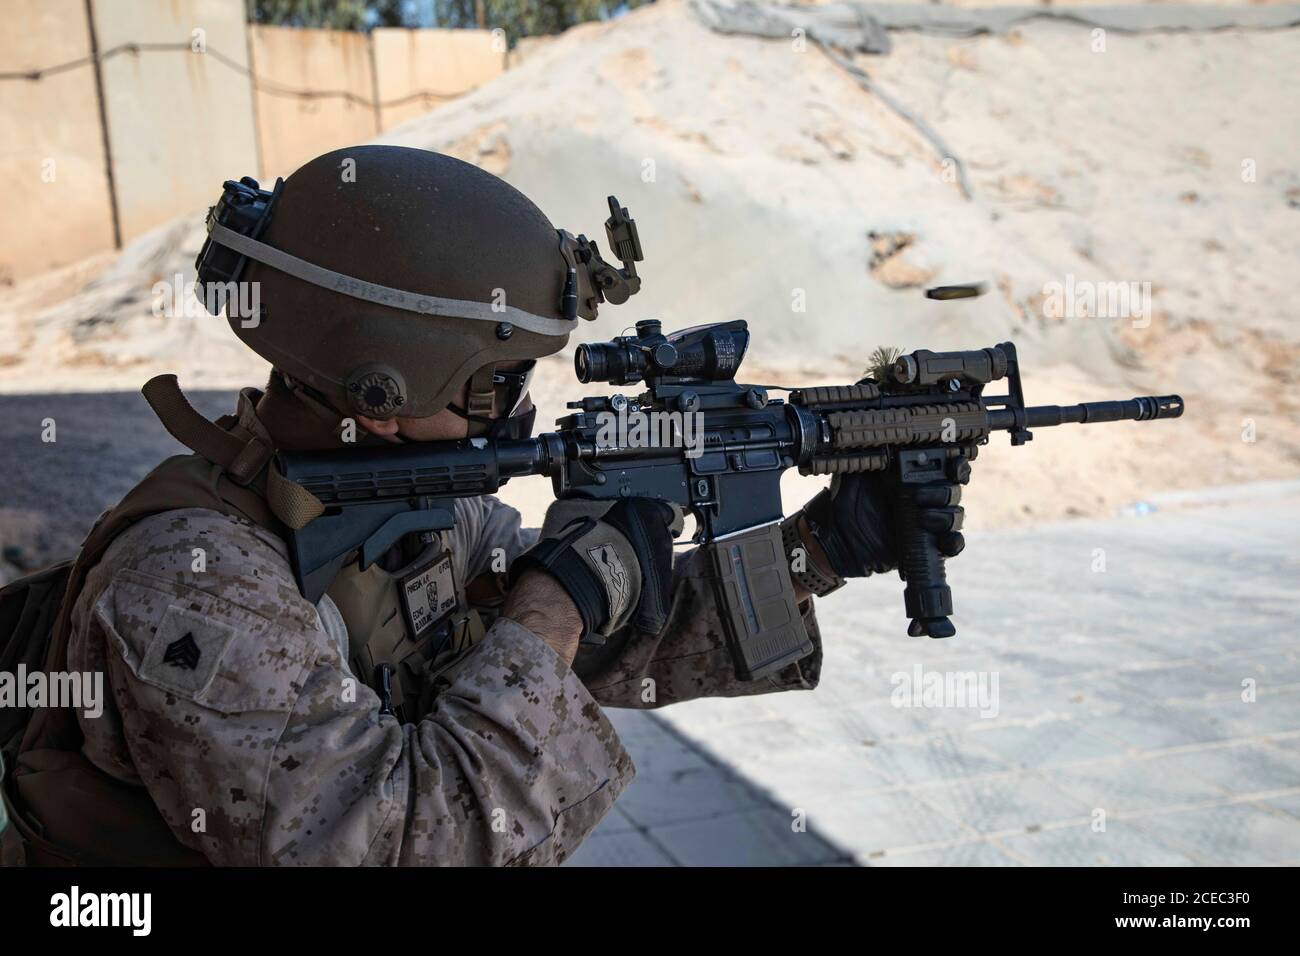 A U.S. Marine with 2nd Battalion, 5th Marine Regiment, assigned to Special Purpose Marine Air-Ground Task Force – Crisis Response - Central Command 20.2, fires his M4 Carbine during a combat marksmanship range at the Baghdad Embassy Compound in Iraq, Aug. 15, 2020. The SPMAGTF-CR-CC is a crisis response force, prepared to deploy a variety of capabilities across the region. (U.S. Marine Corps photo by Cpl. Thomas Spencer) Stock Photo